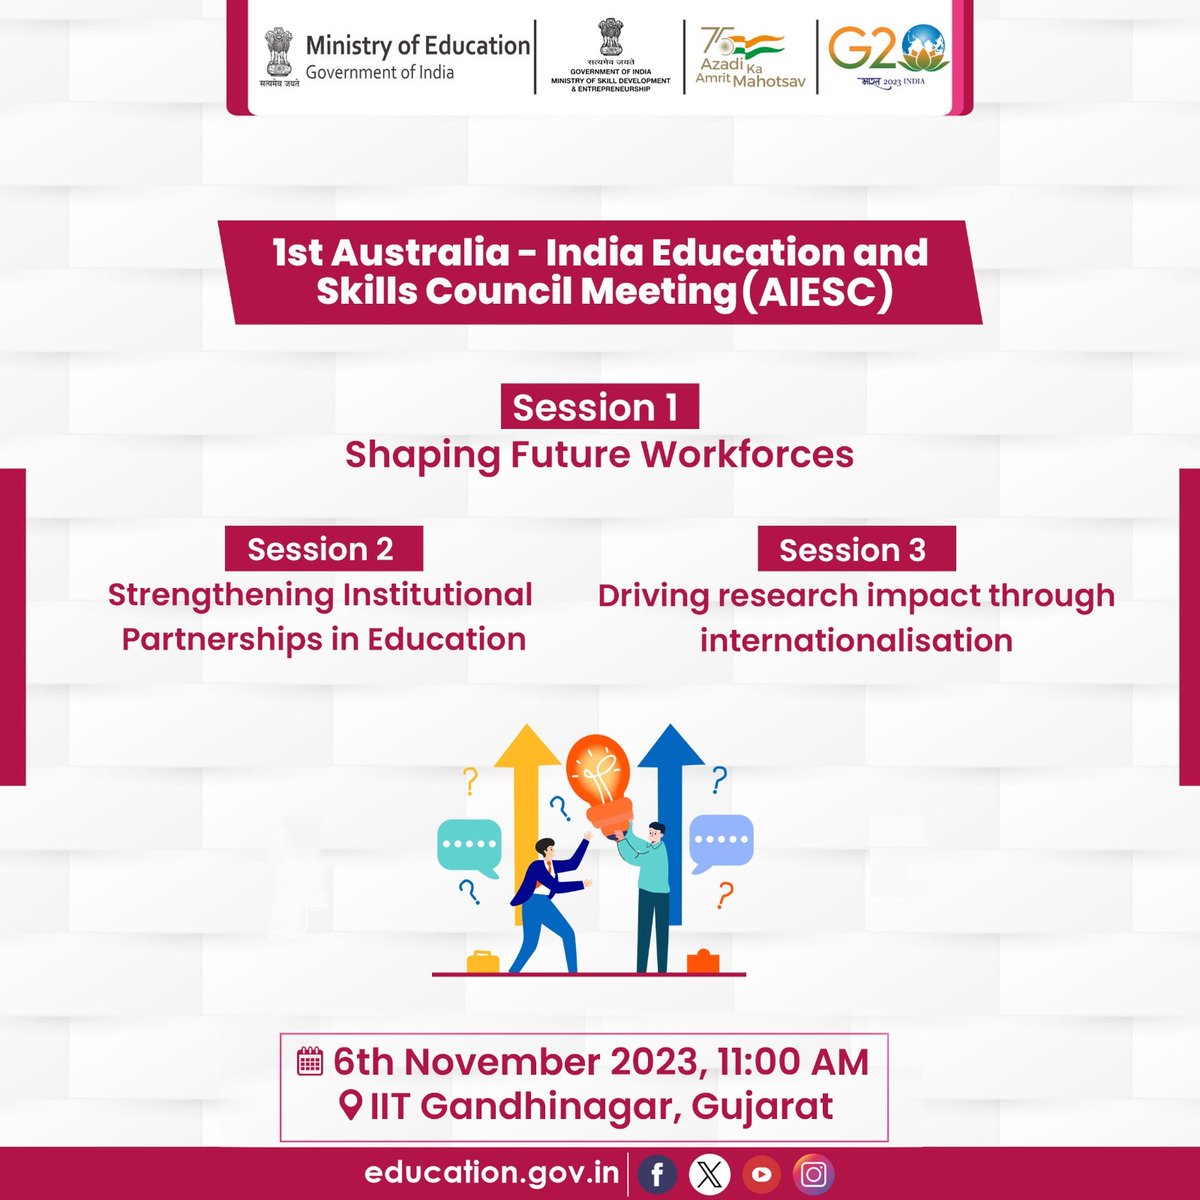 The first meeting of the Australia India Education and Skills Council (AIESC) will be held at @iitgn today.

The meeting will feature three sessions:

During Session 1 titled Shaping Future Workforces, eminent experts will deliberate on educating and skilling graduates for the